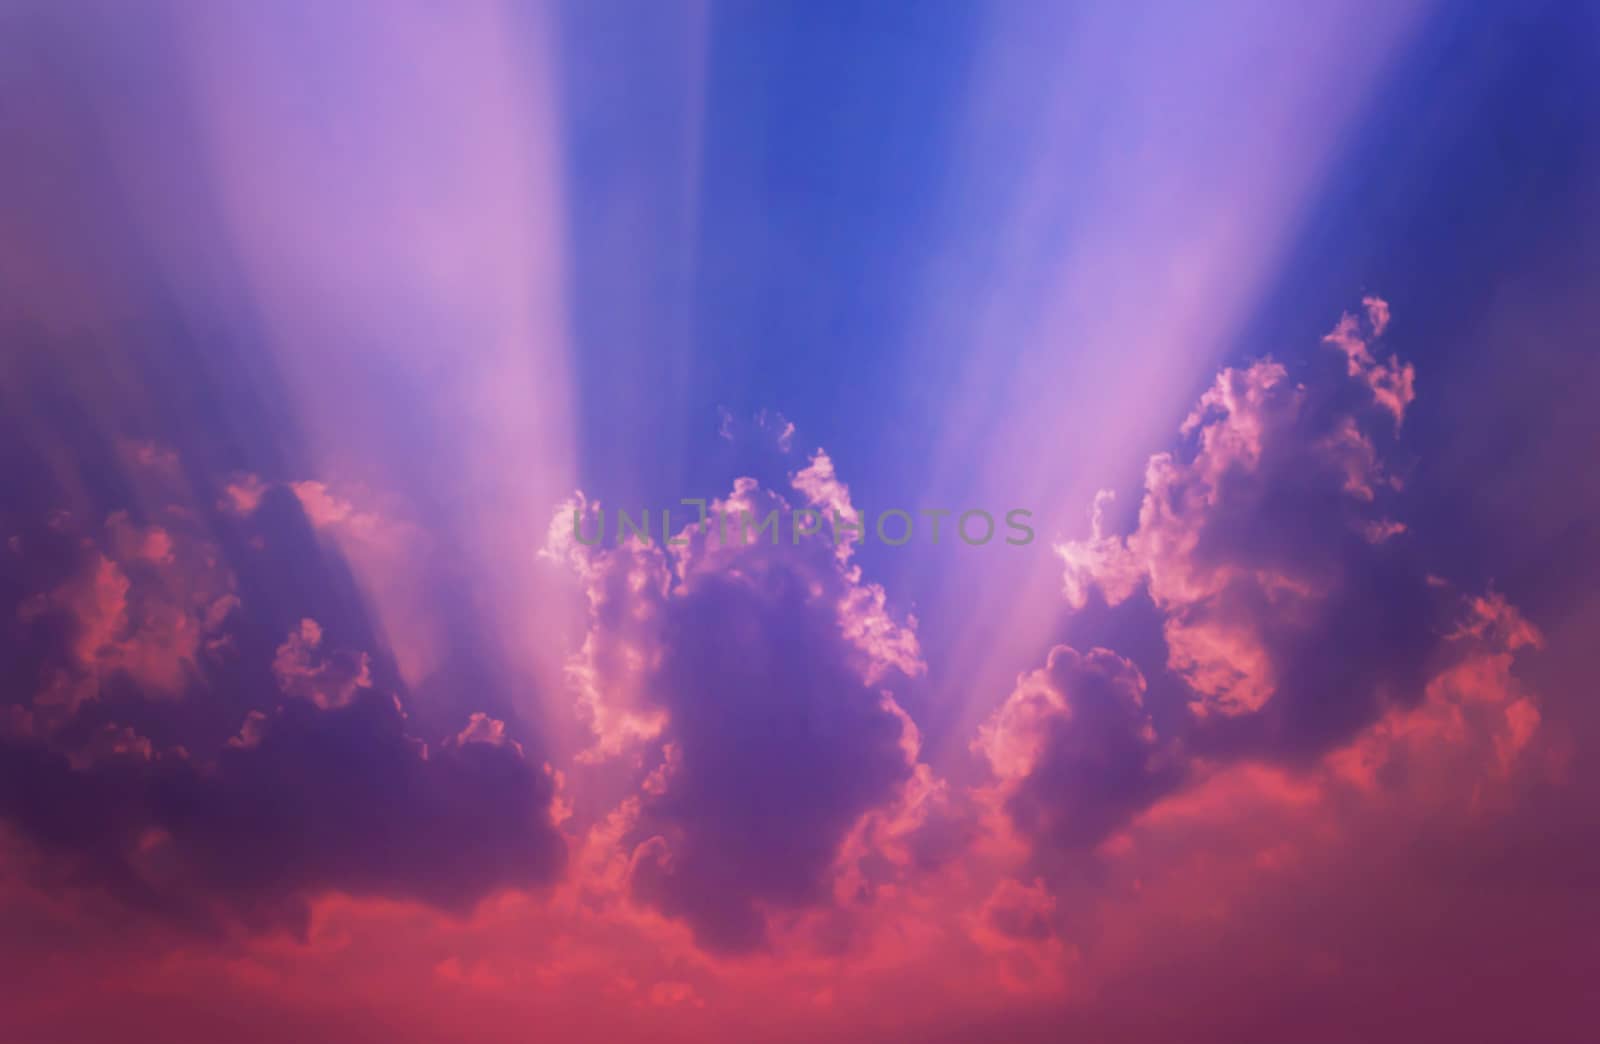 Abstract colourful blue purple pink dreamy sky with romantic soft mood